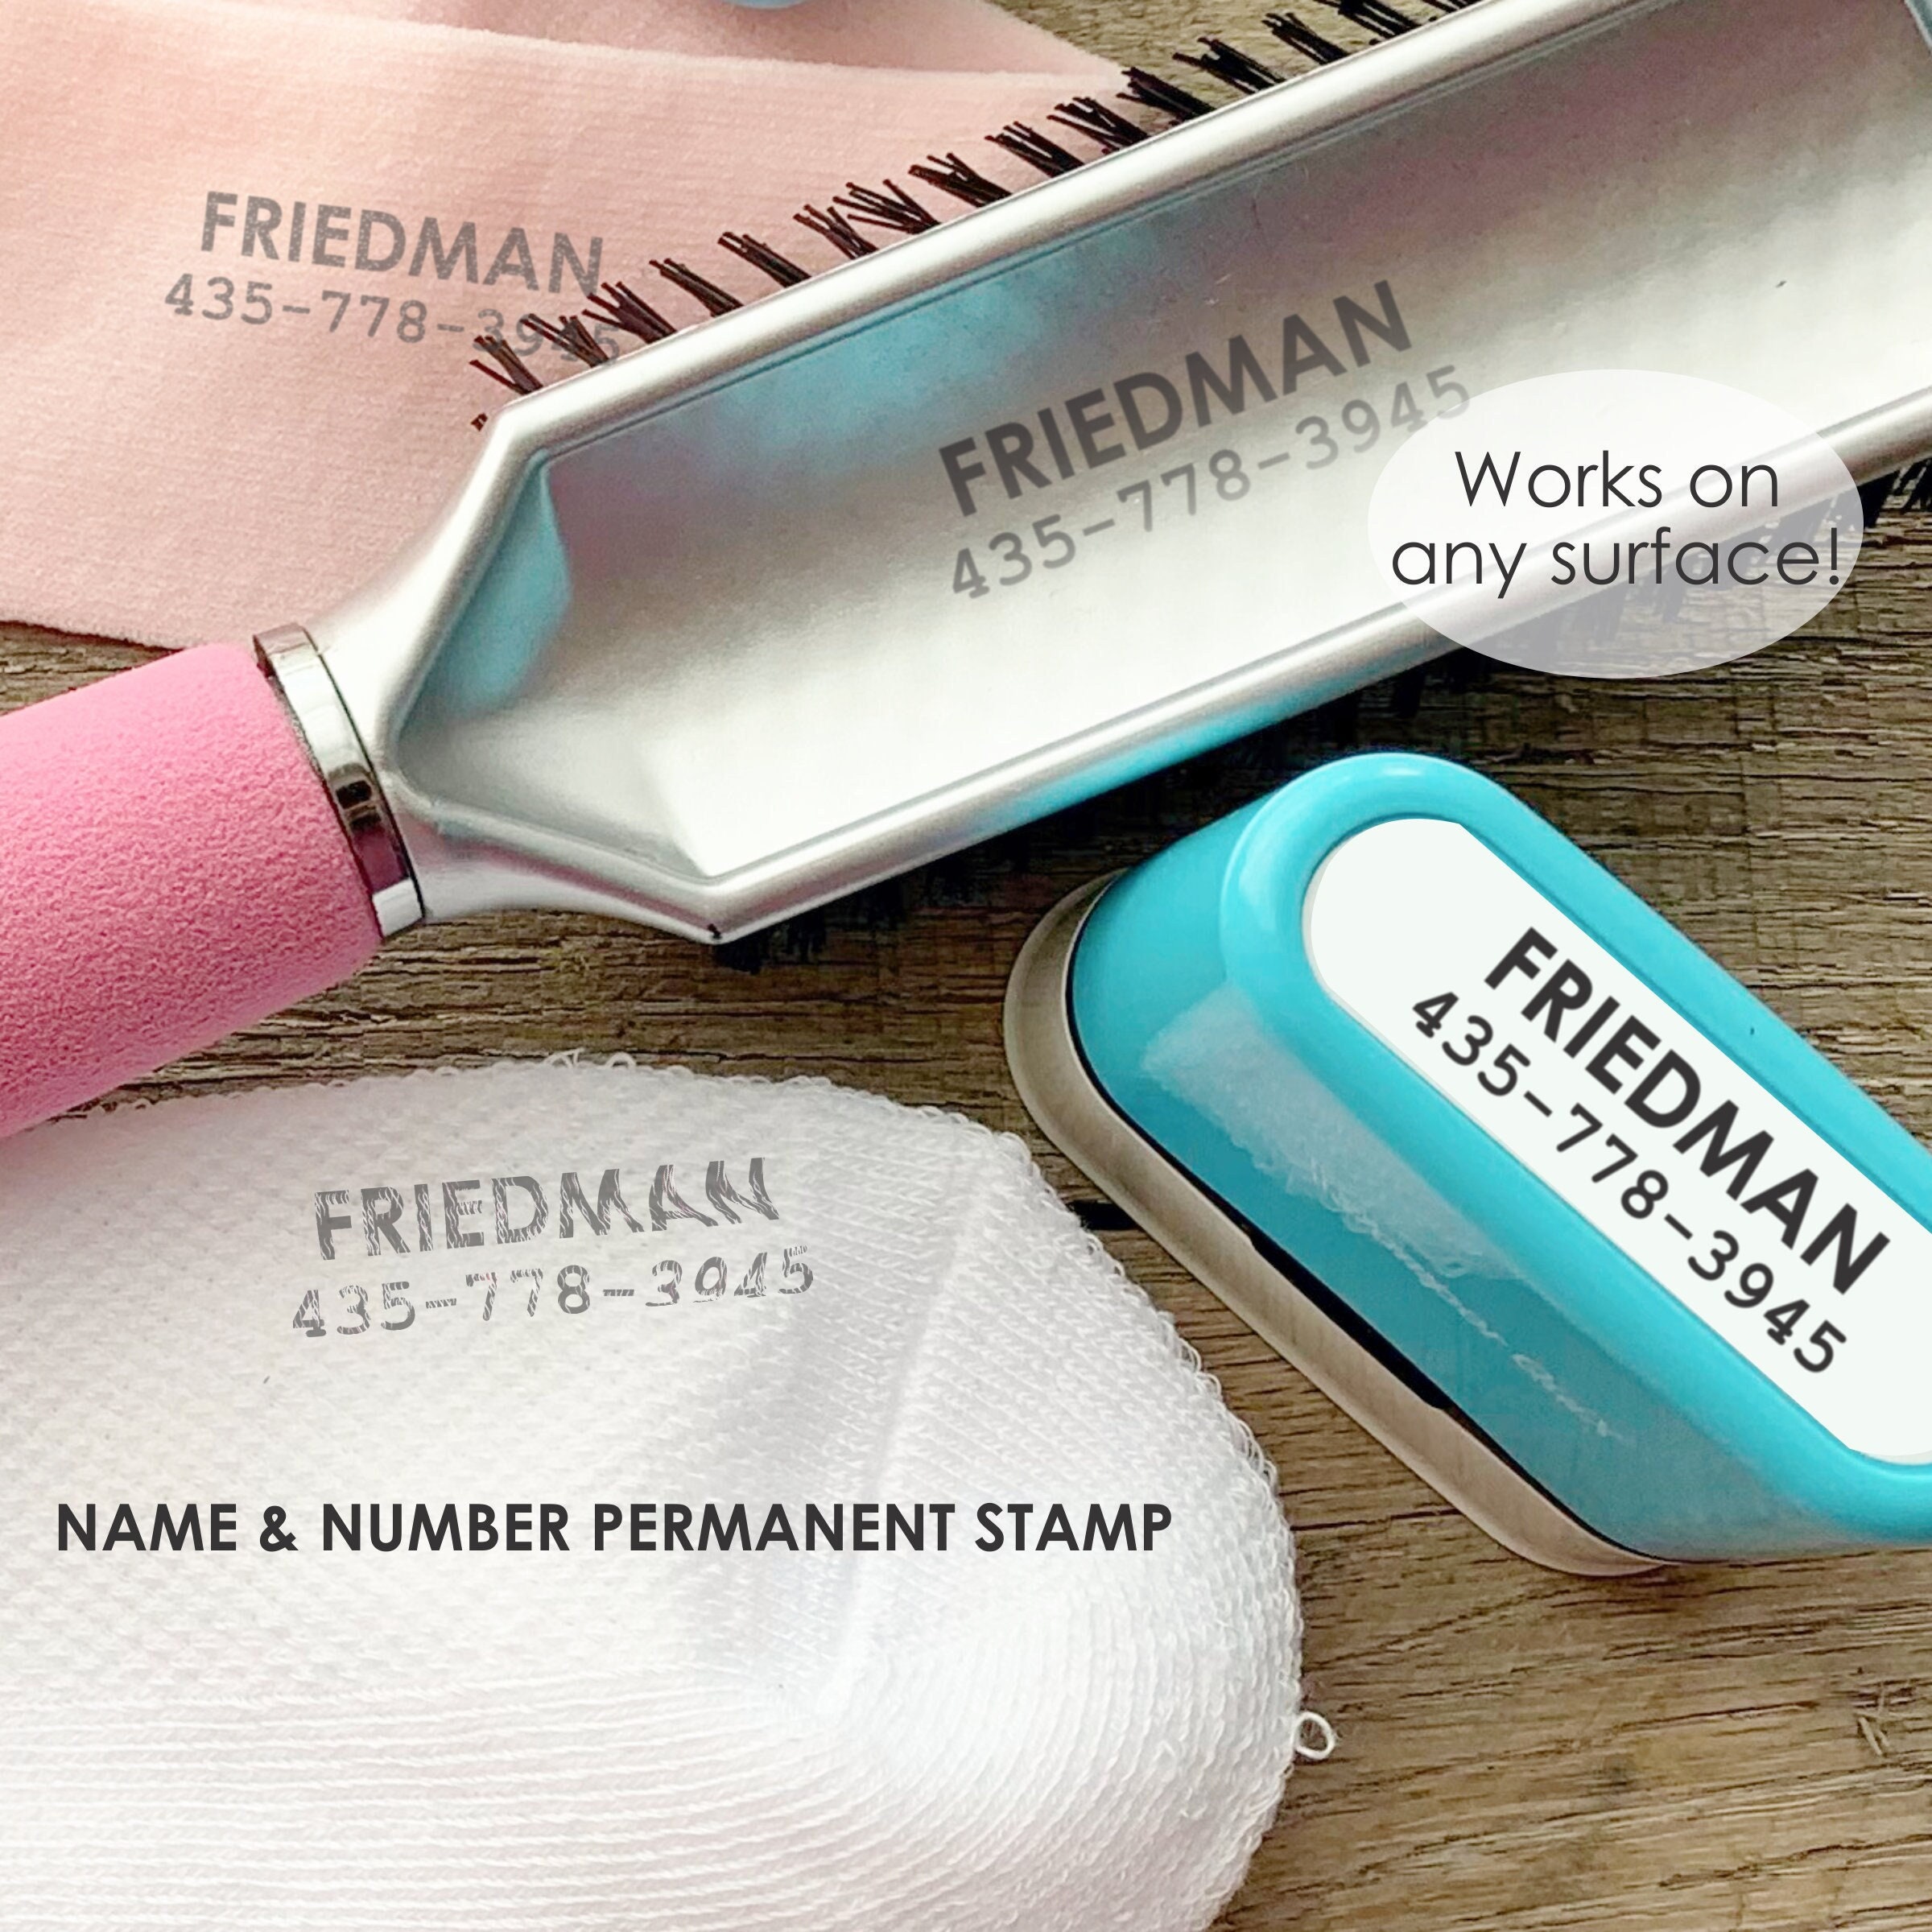 Name & Phone Number Stamp for Clothing, Permanent on Any Surface